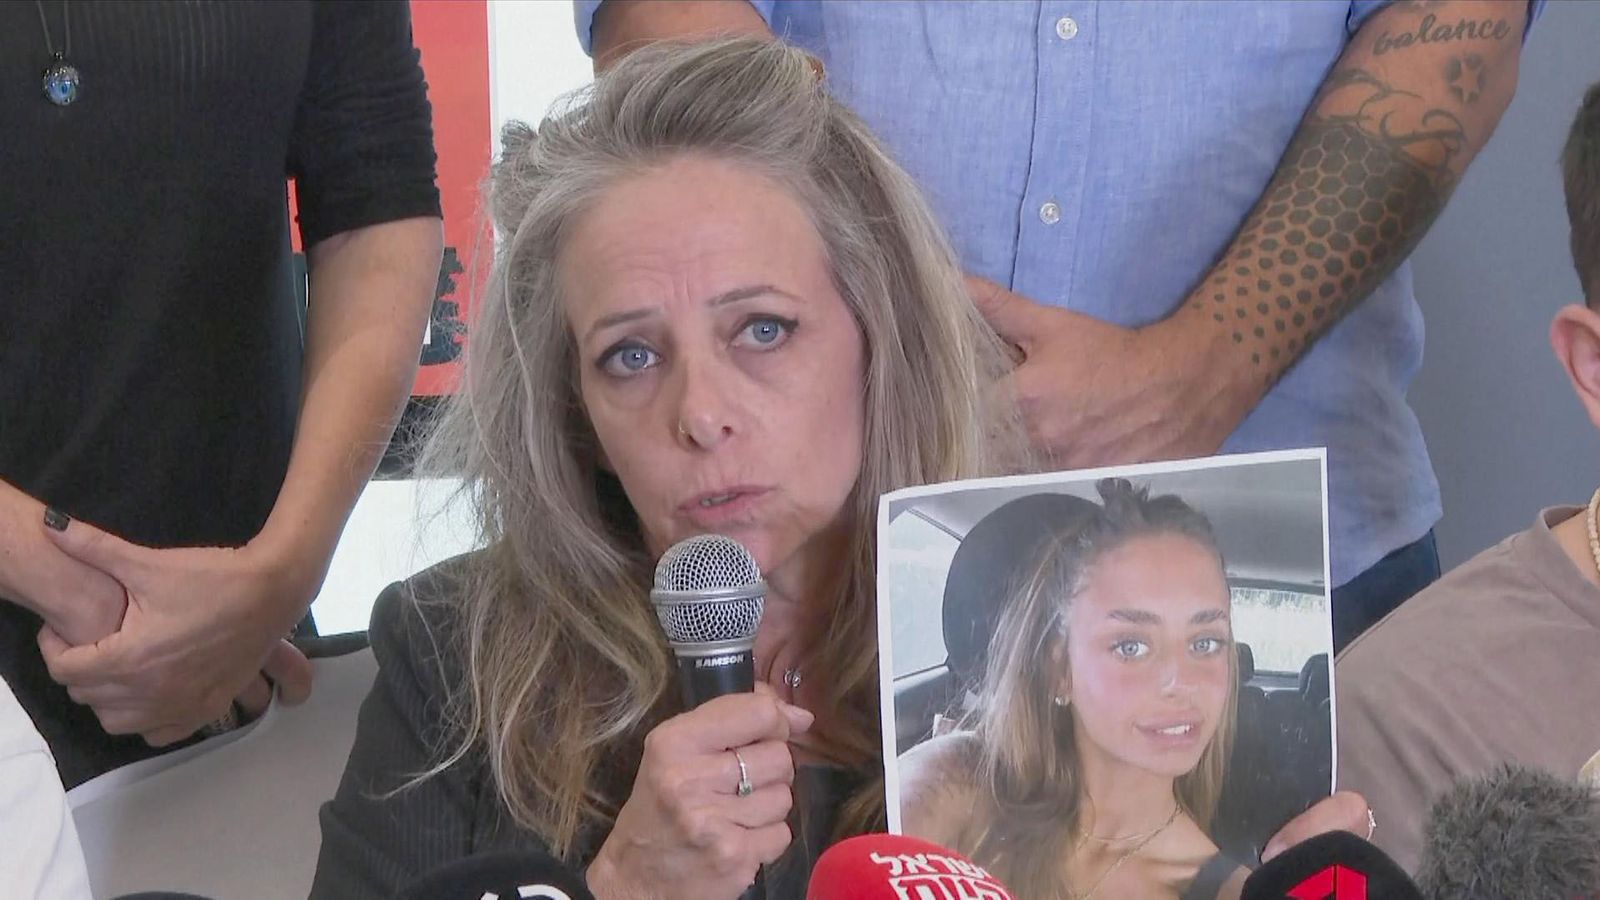 Israel-Hamas war: Mother of woman seen in hostage video pleads for help, saying 'bring my baby back home'